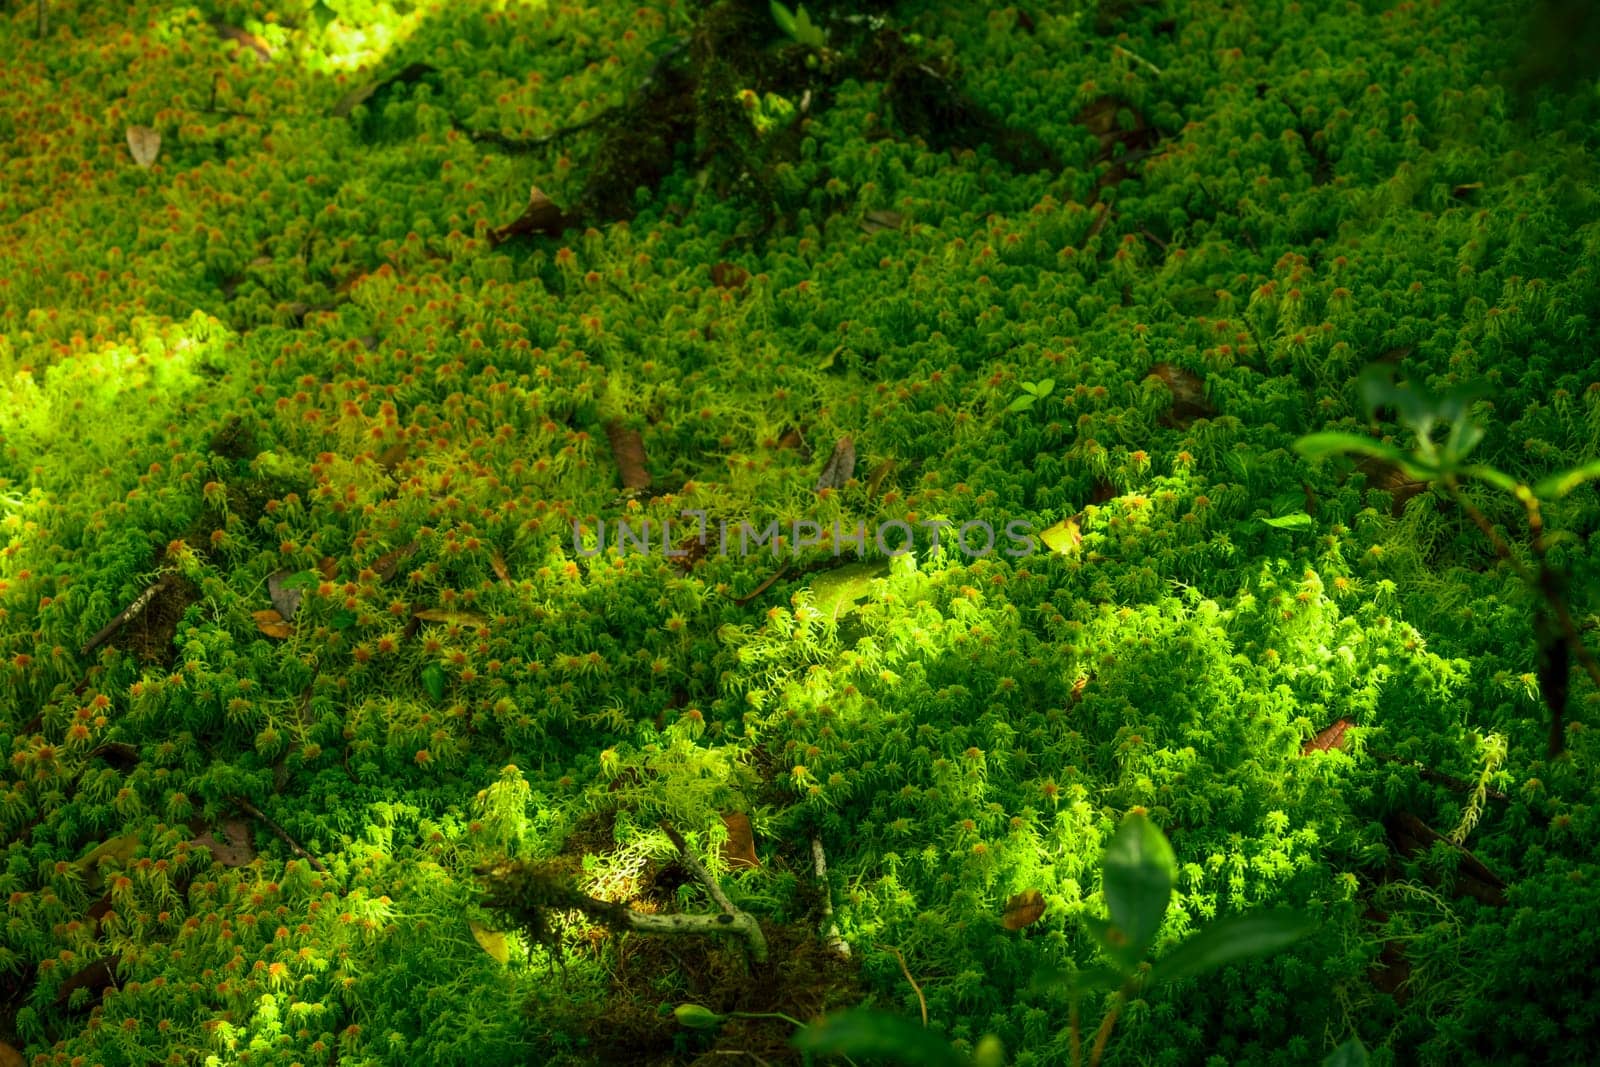 Sunlit Sphagnum moss in swamp forest. Nature landscape. Green peat moss. Carbon sequestration. Moss conservation. Moss ecology. Peatland carbon storage. Sphagnum habitats. Reservoir of the forest. by Fahroni